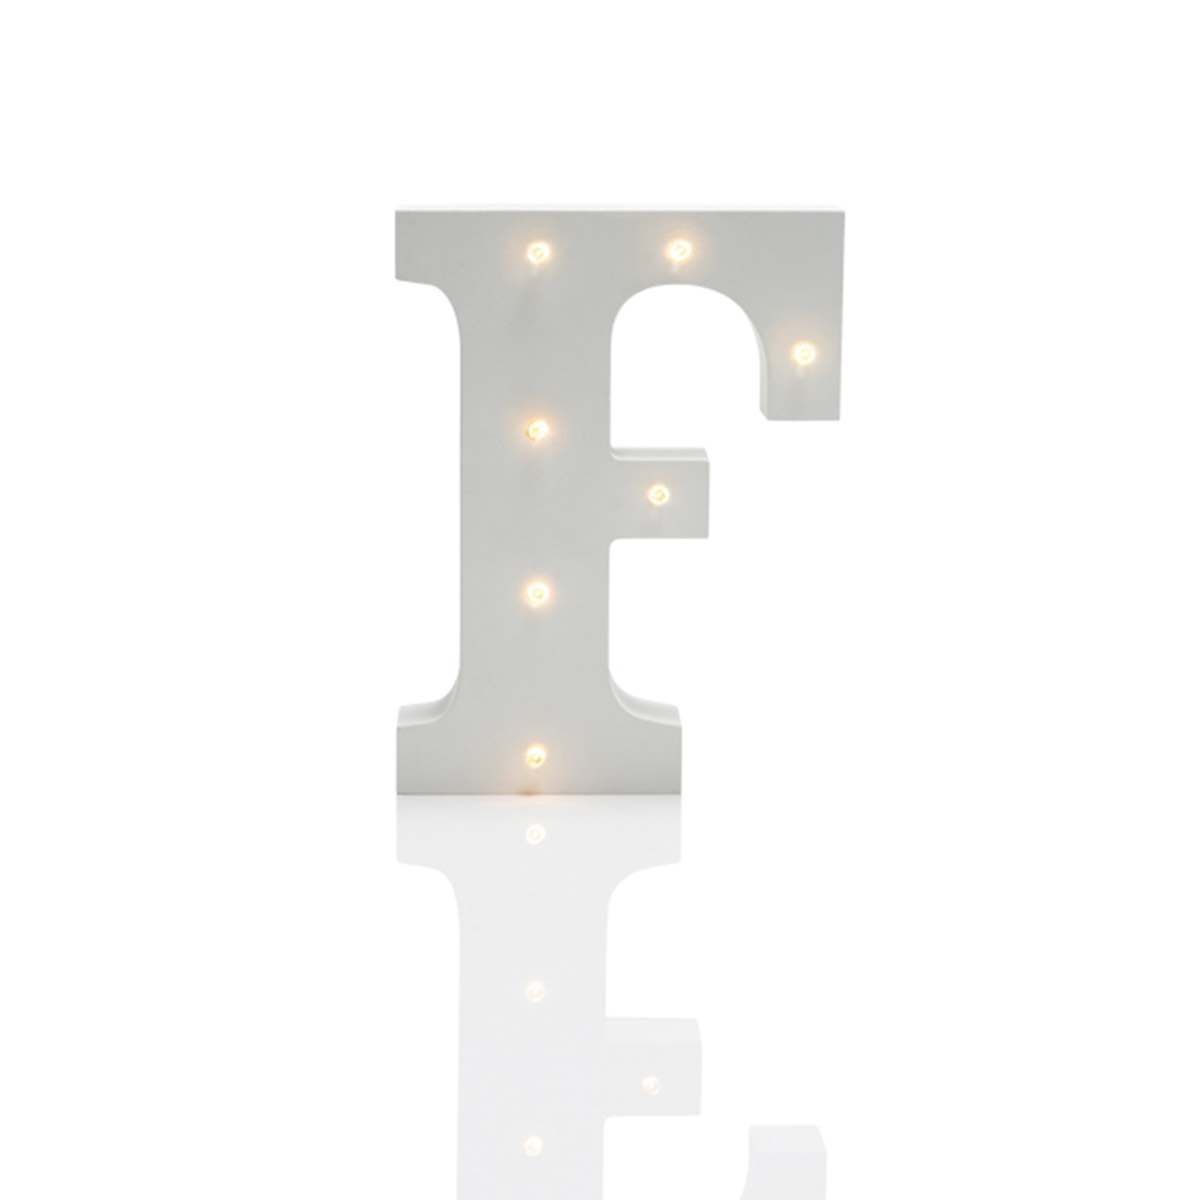 Alphabet 'F' Marquee Battery Light Up Circus Letter, Warm White LEDs, 16cm image 1